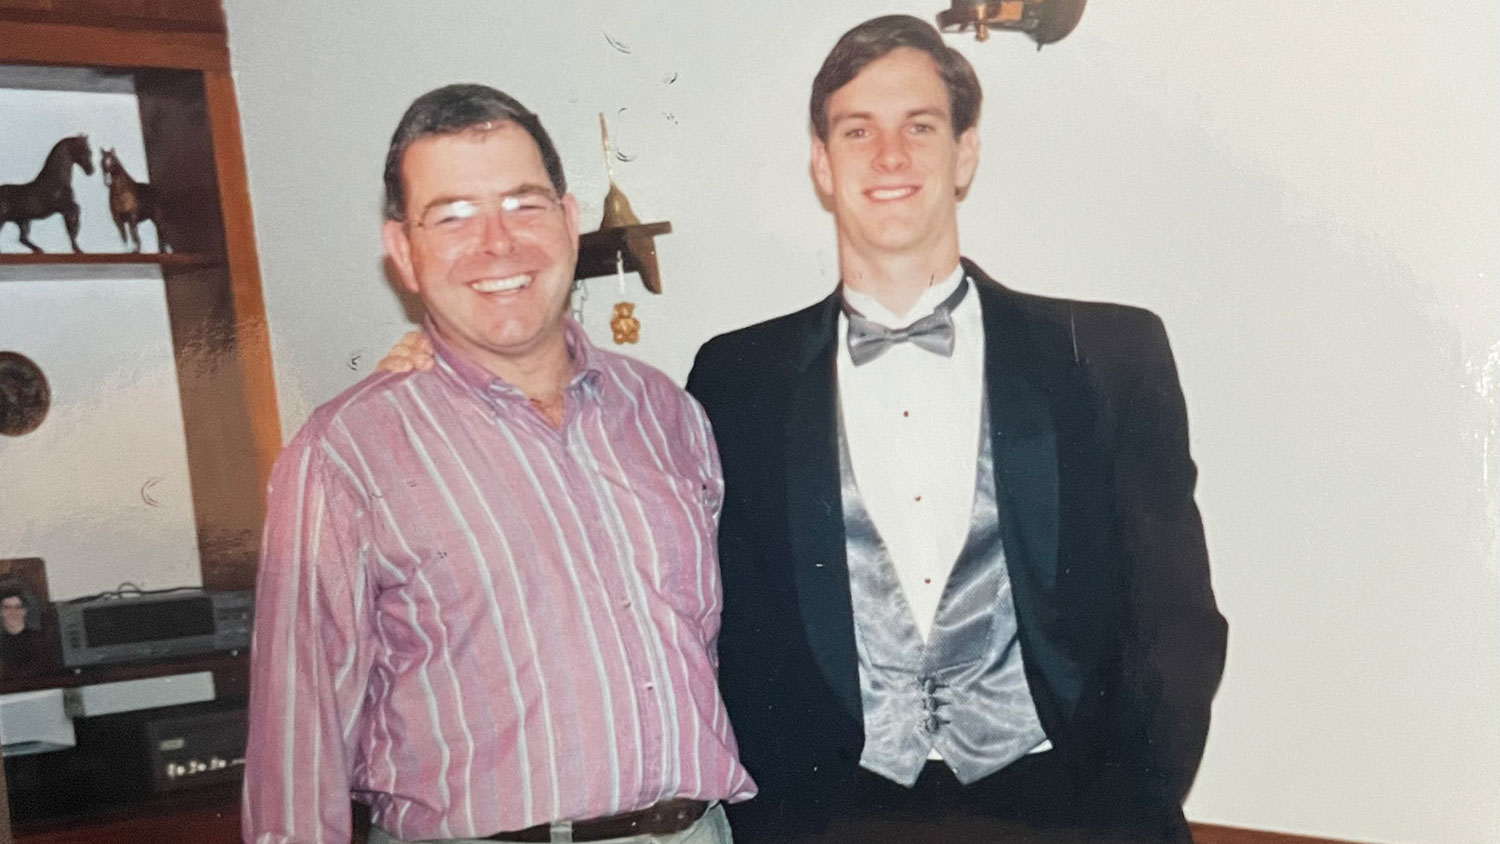 Alex Darden (right) with his father, Jim.